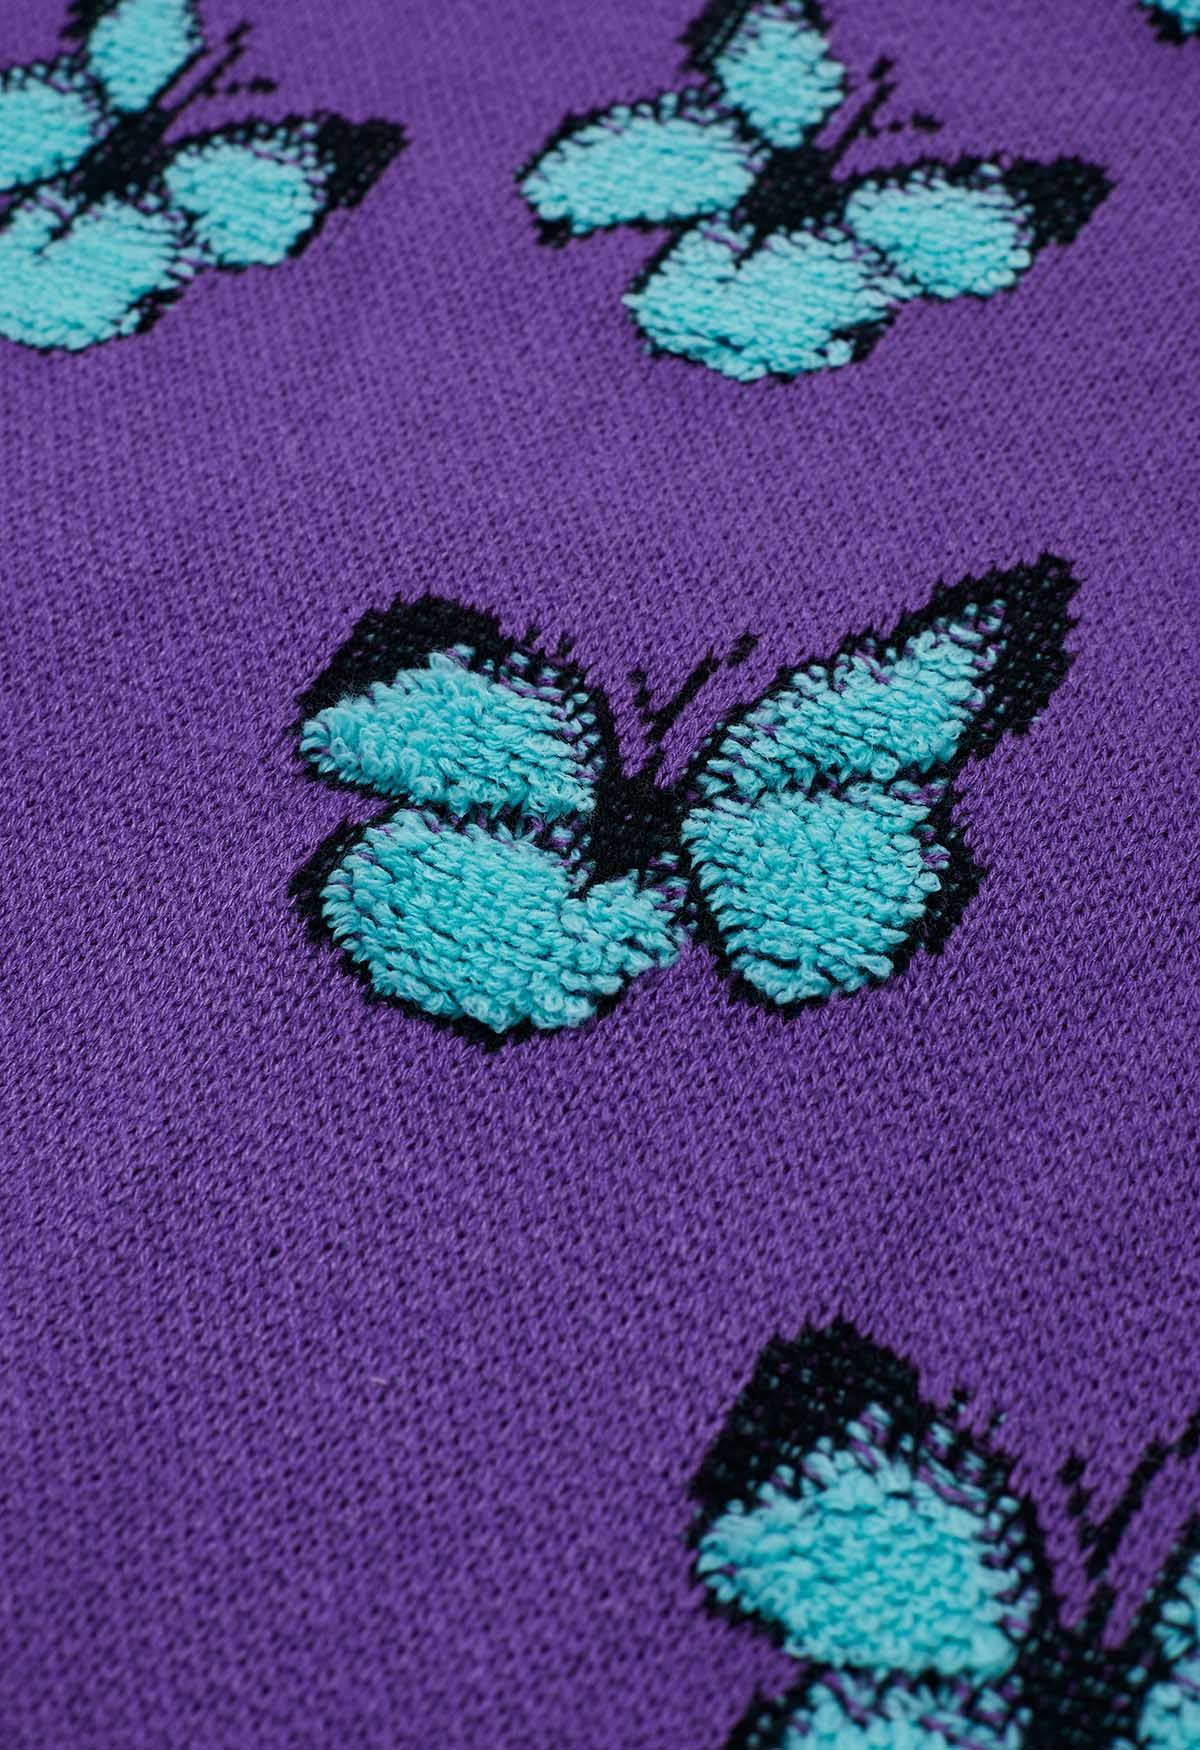 Gerippter Strickpullover „Balletic Butterfly“ in Lila